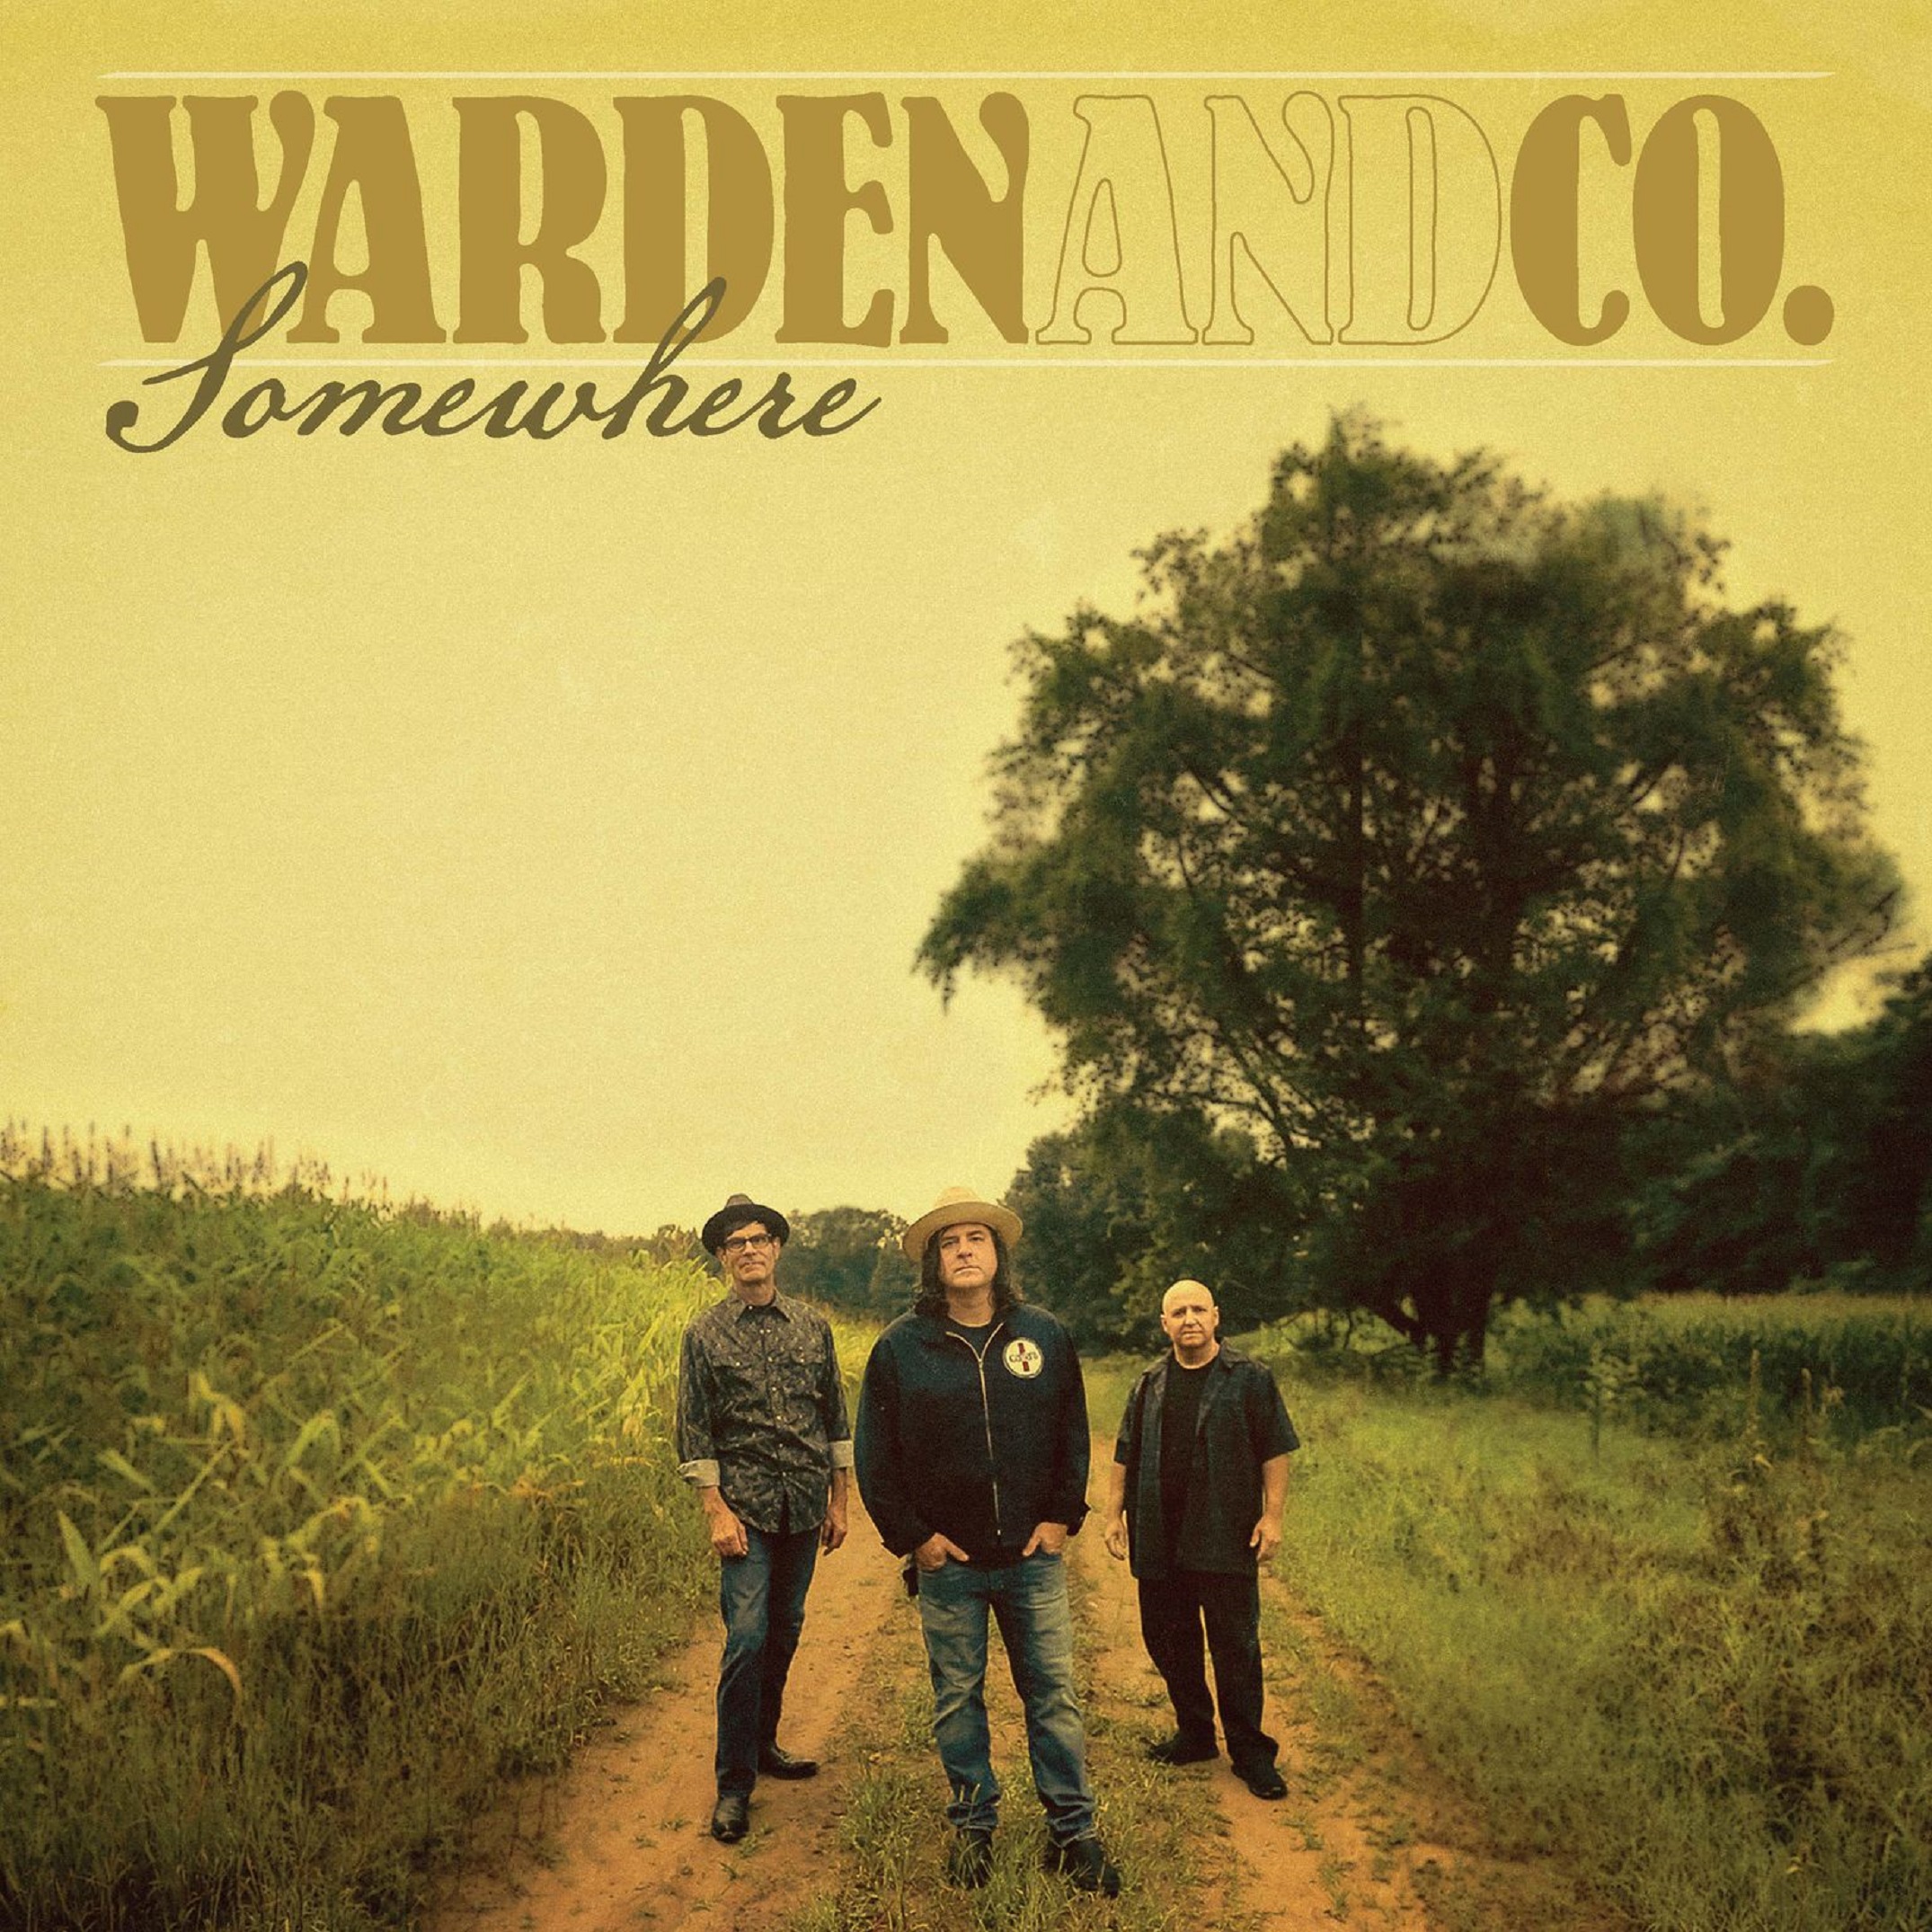 Warden and Co. set to release new album on April 8, 2022